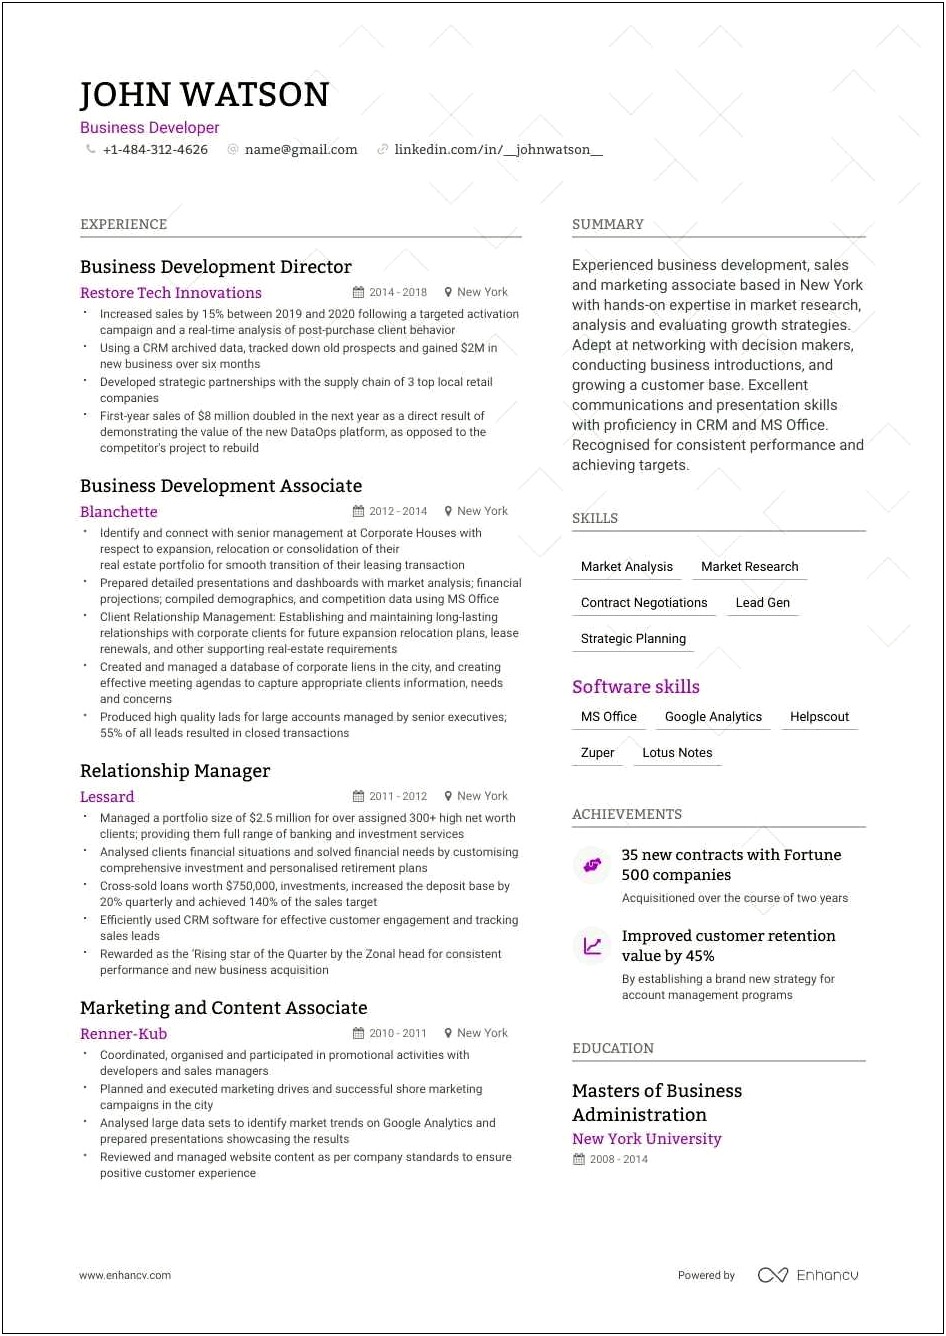 Manager Skills And Abilities Summary Resume